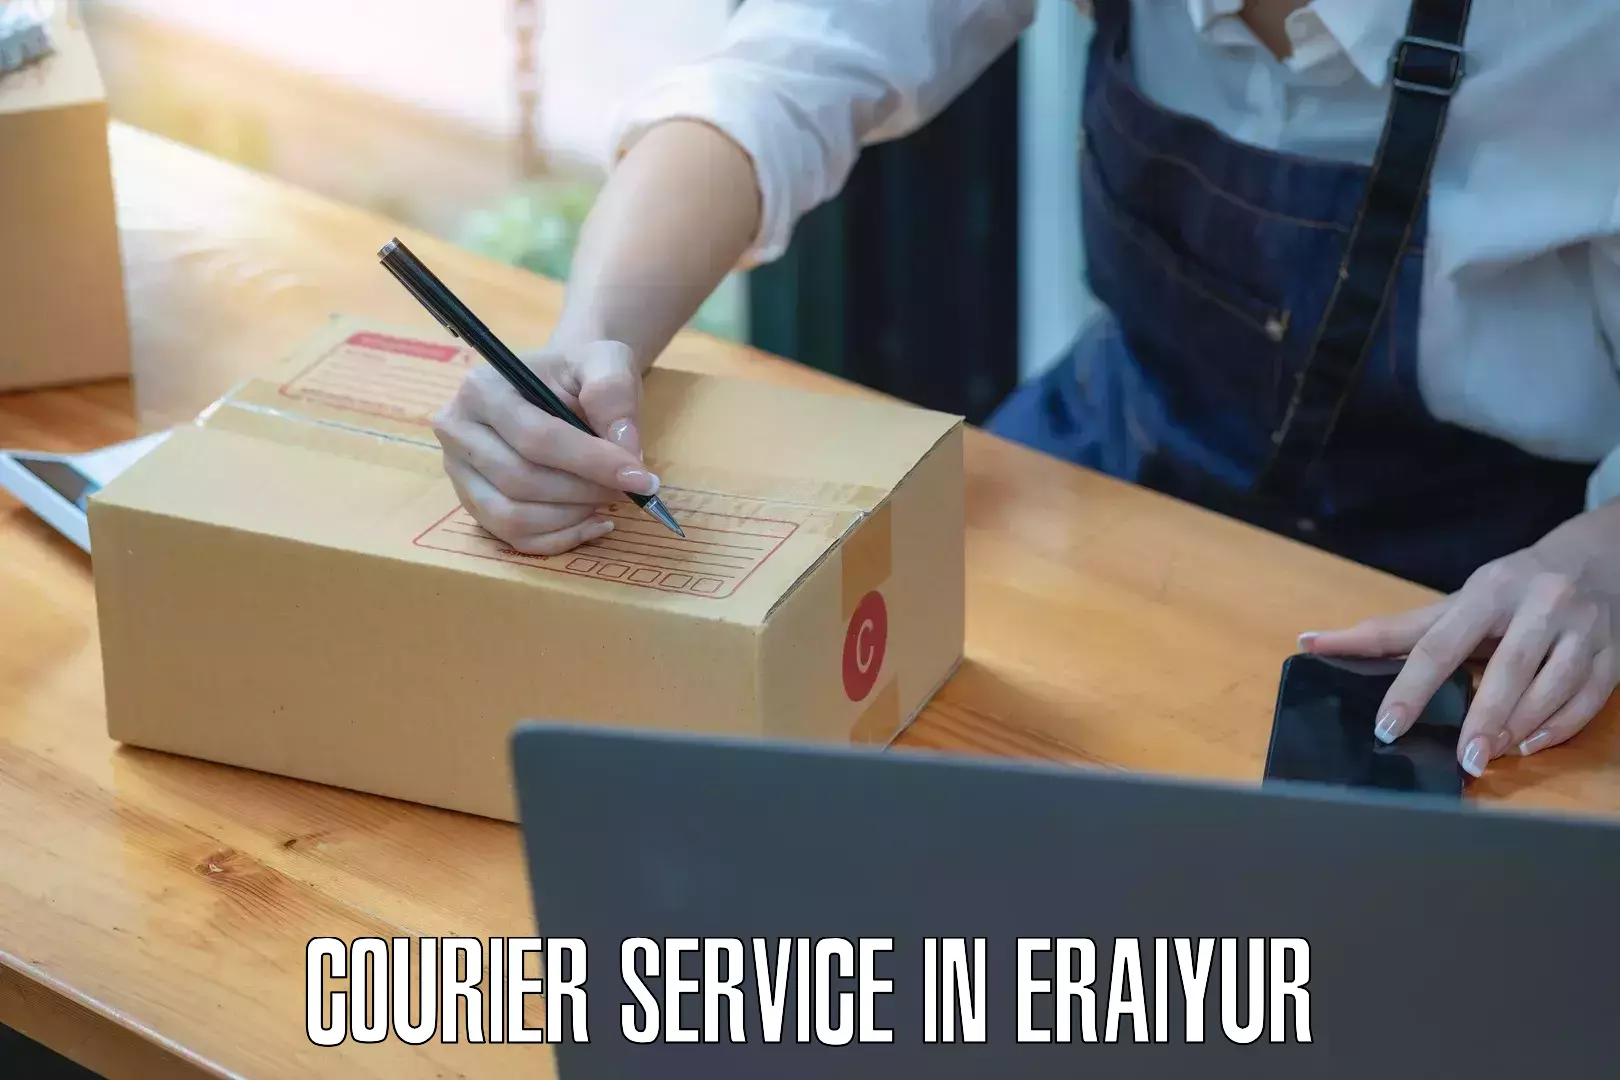 Courier service innovation in Eraiyur